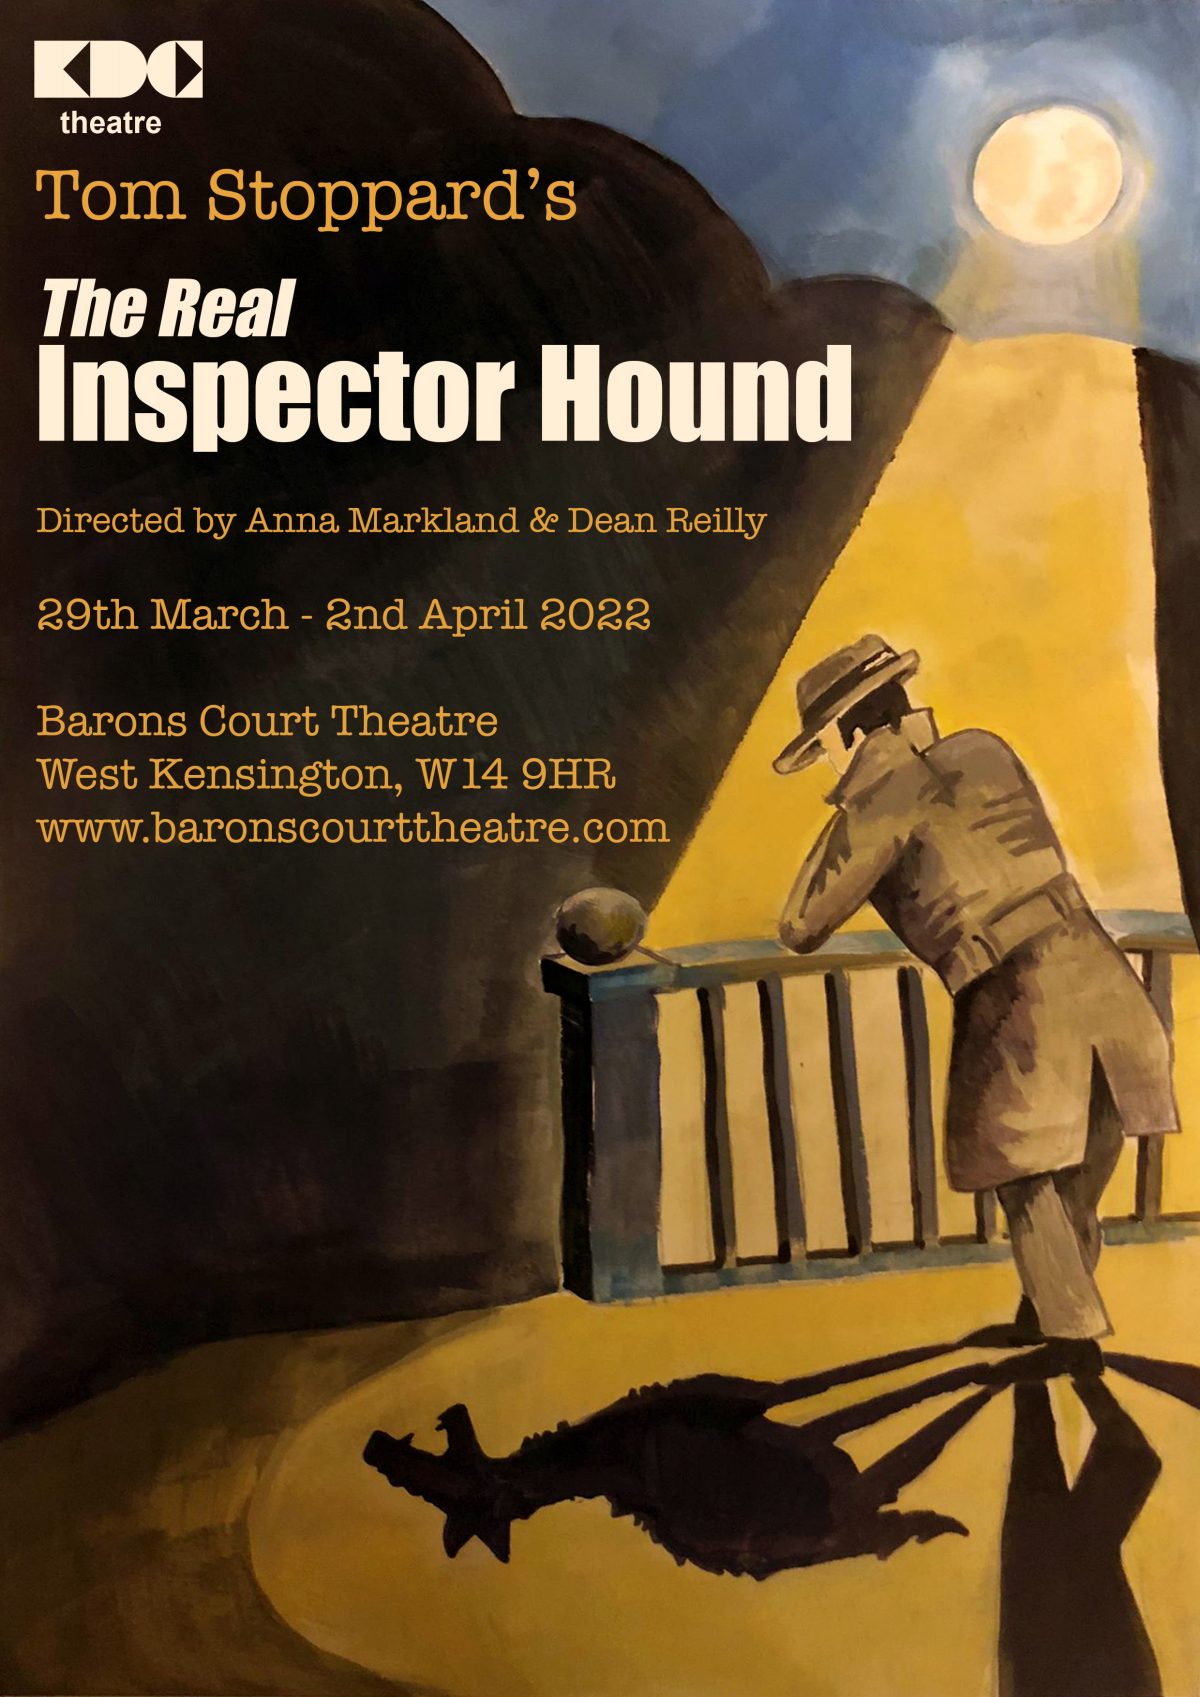 The Real Inspector Hound – this week